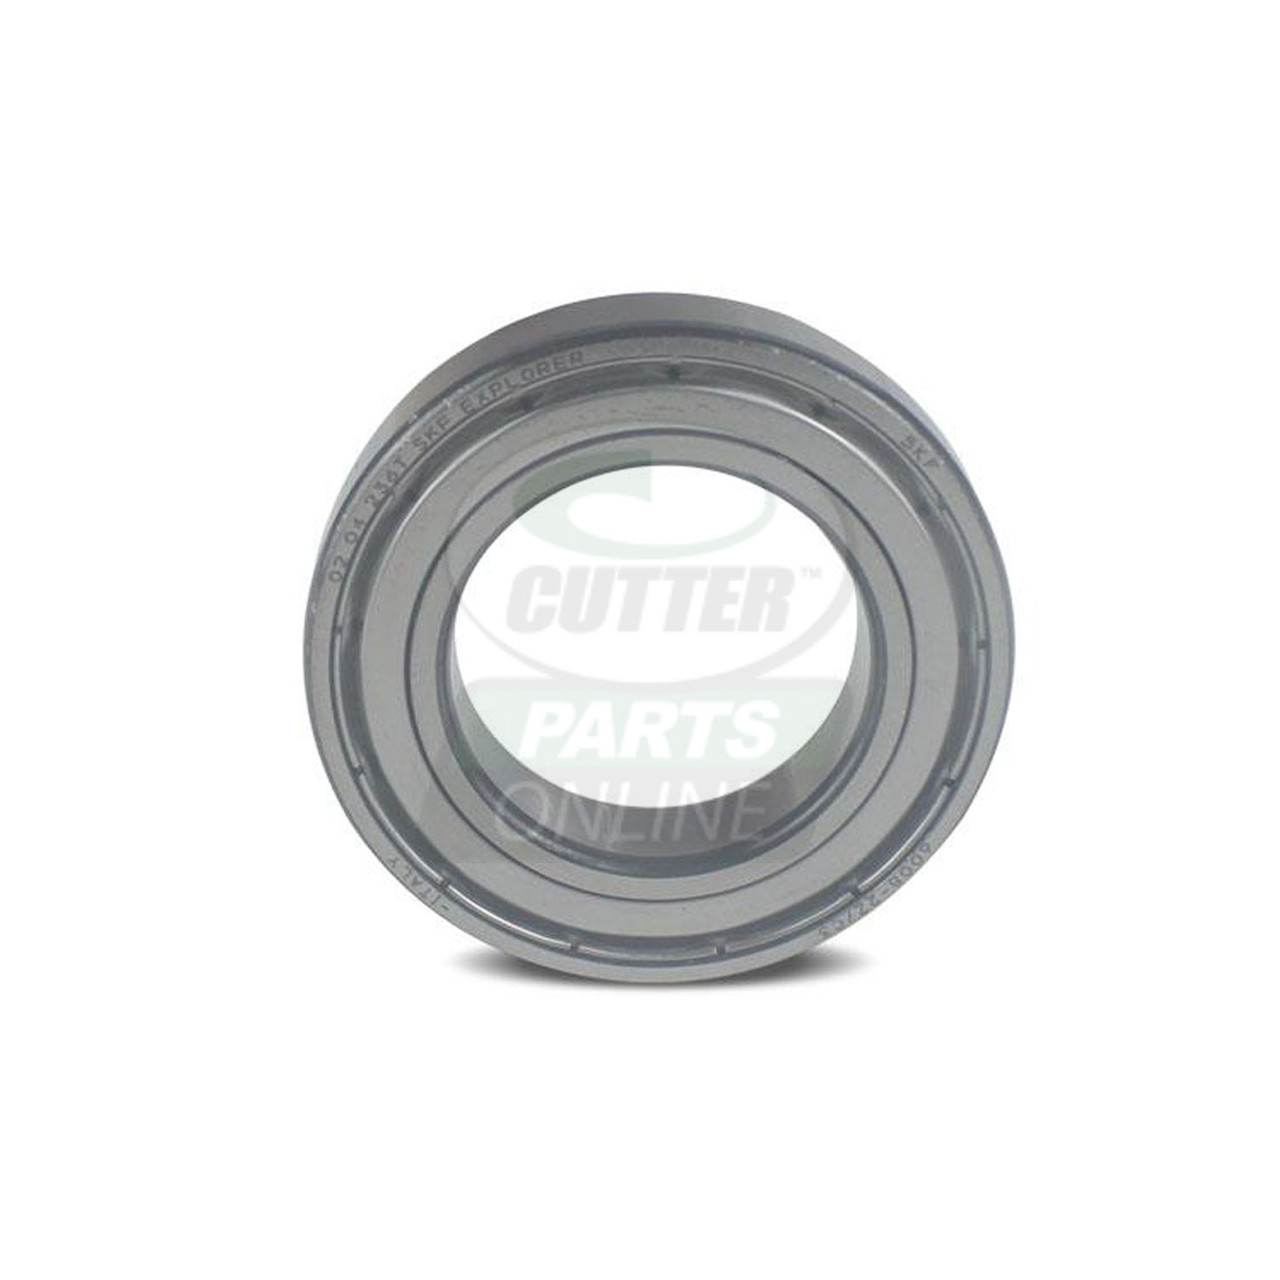 New Bearing - Ball, Stainless - Replaces Toro 115-6860